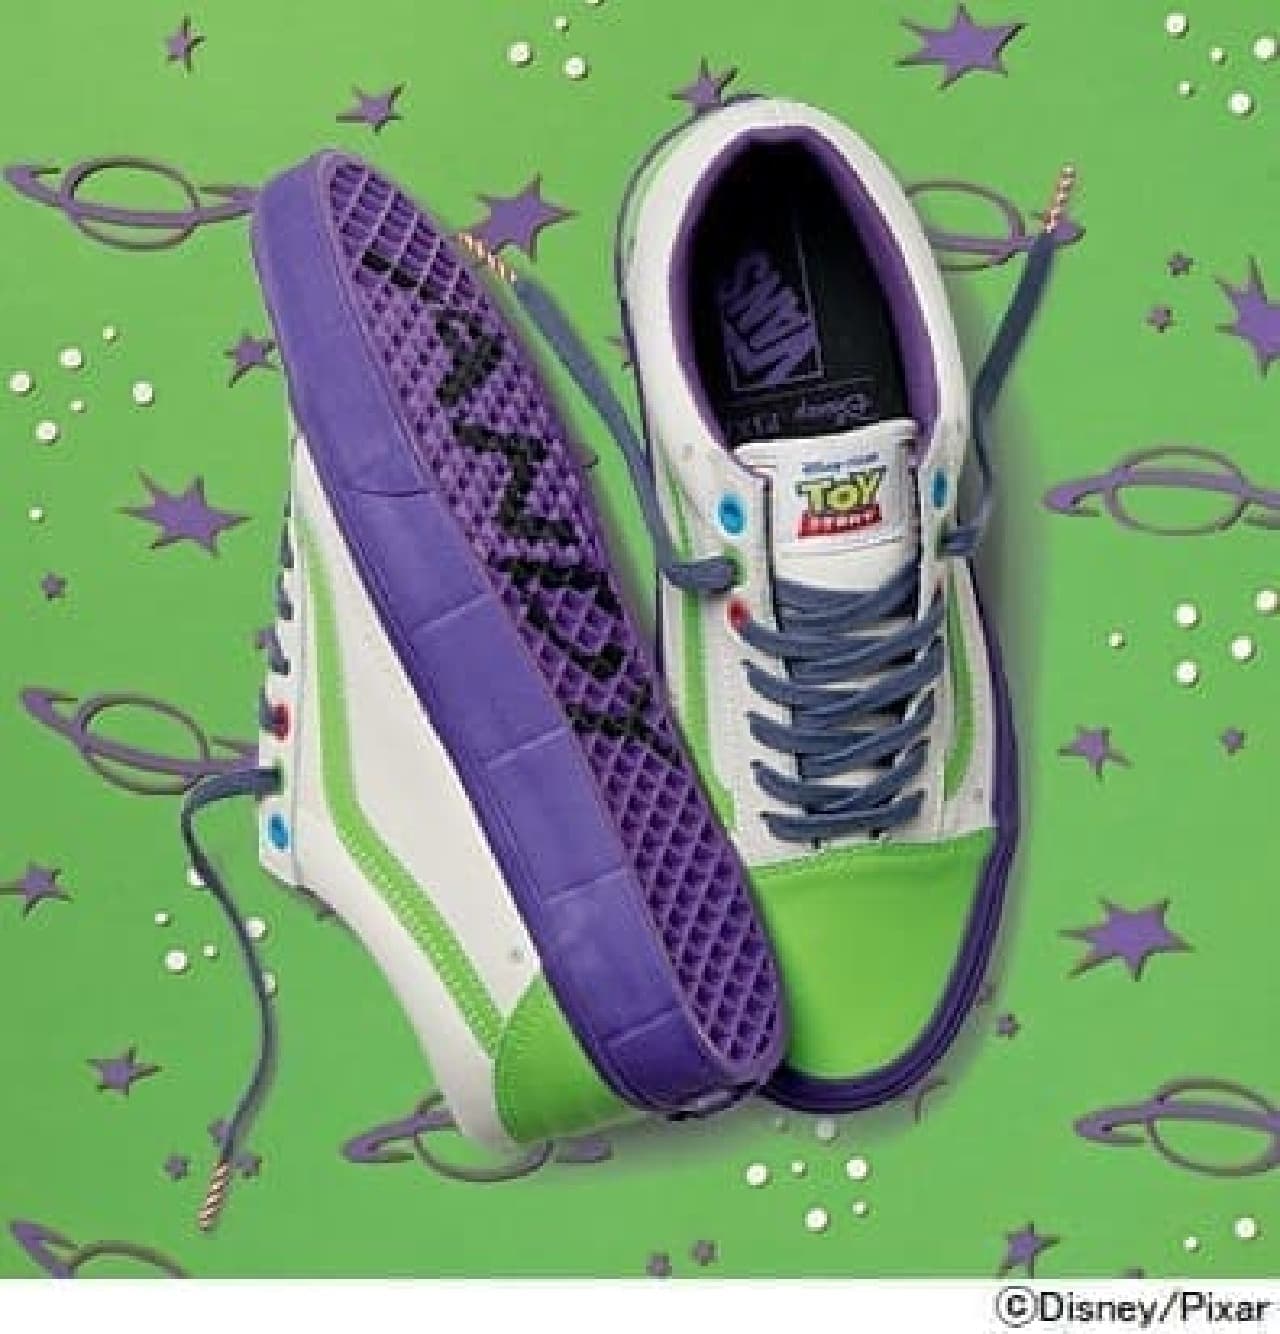 VANS x "Toy Story" collaboration sneakers